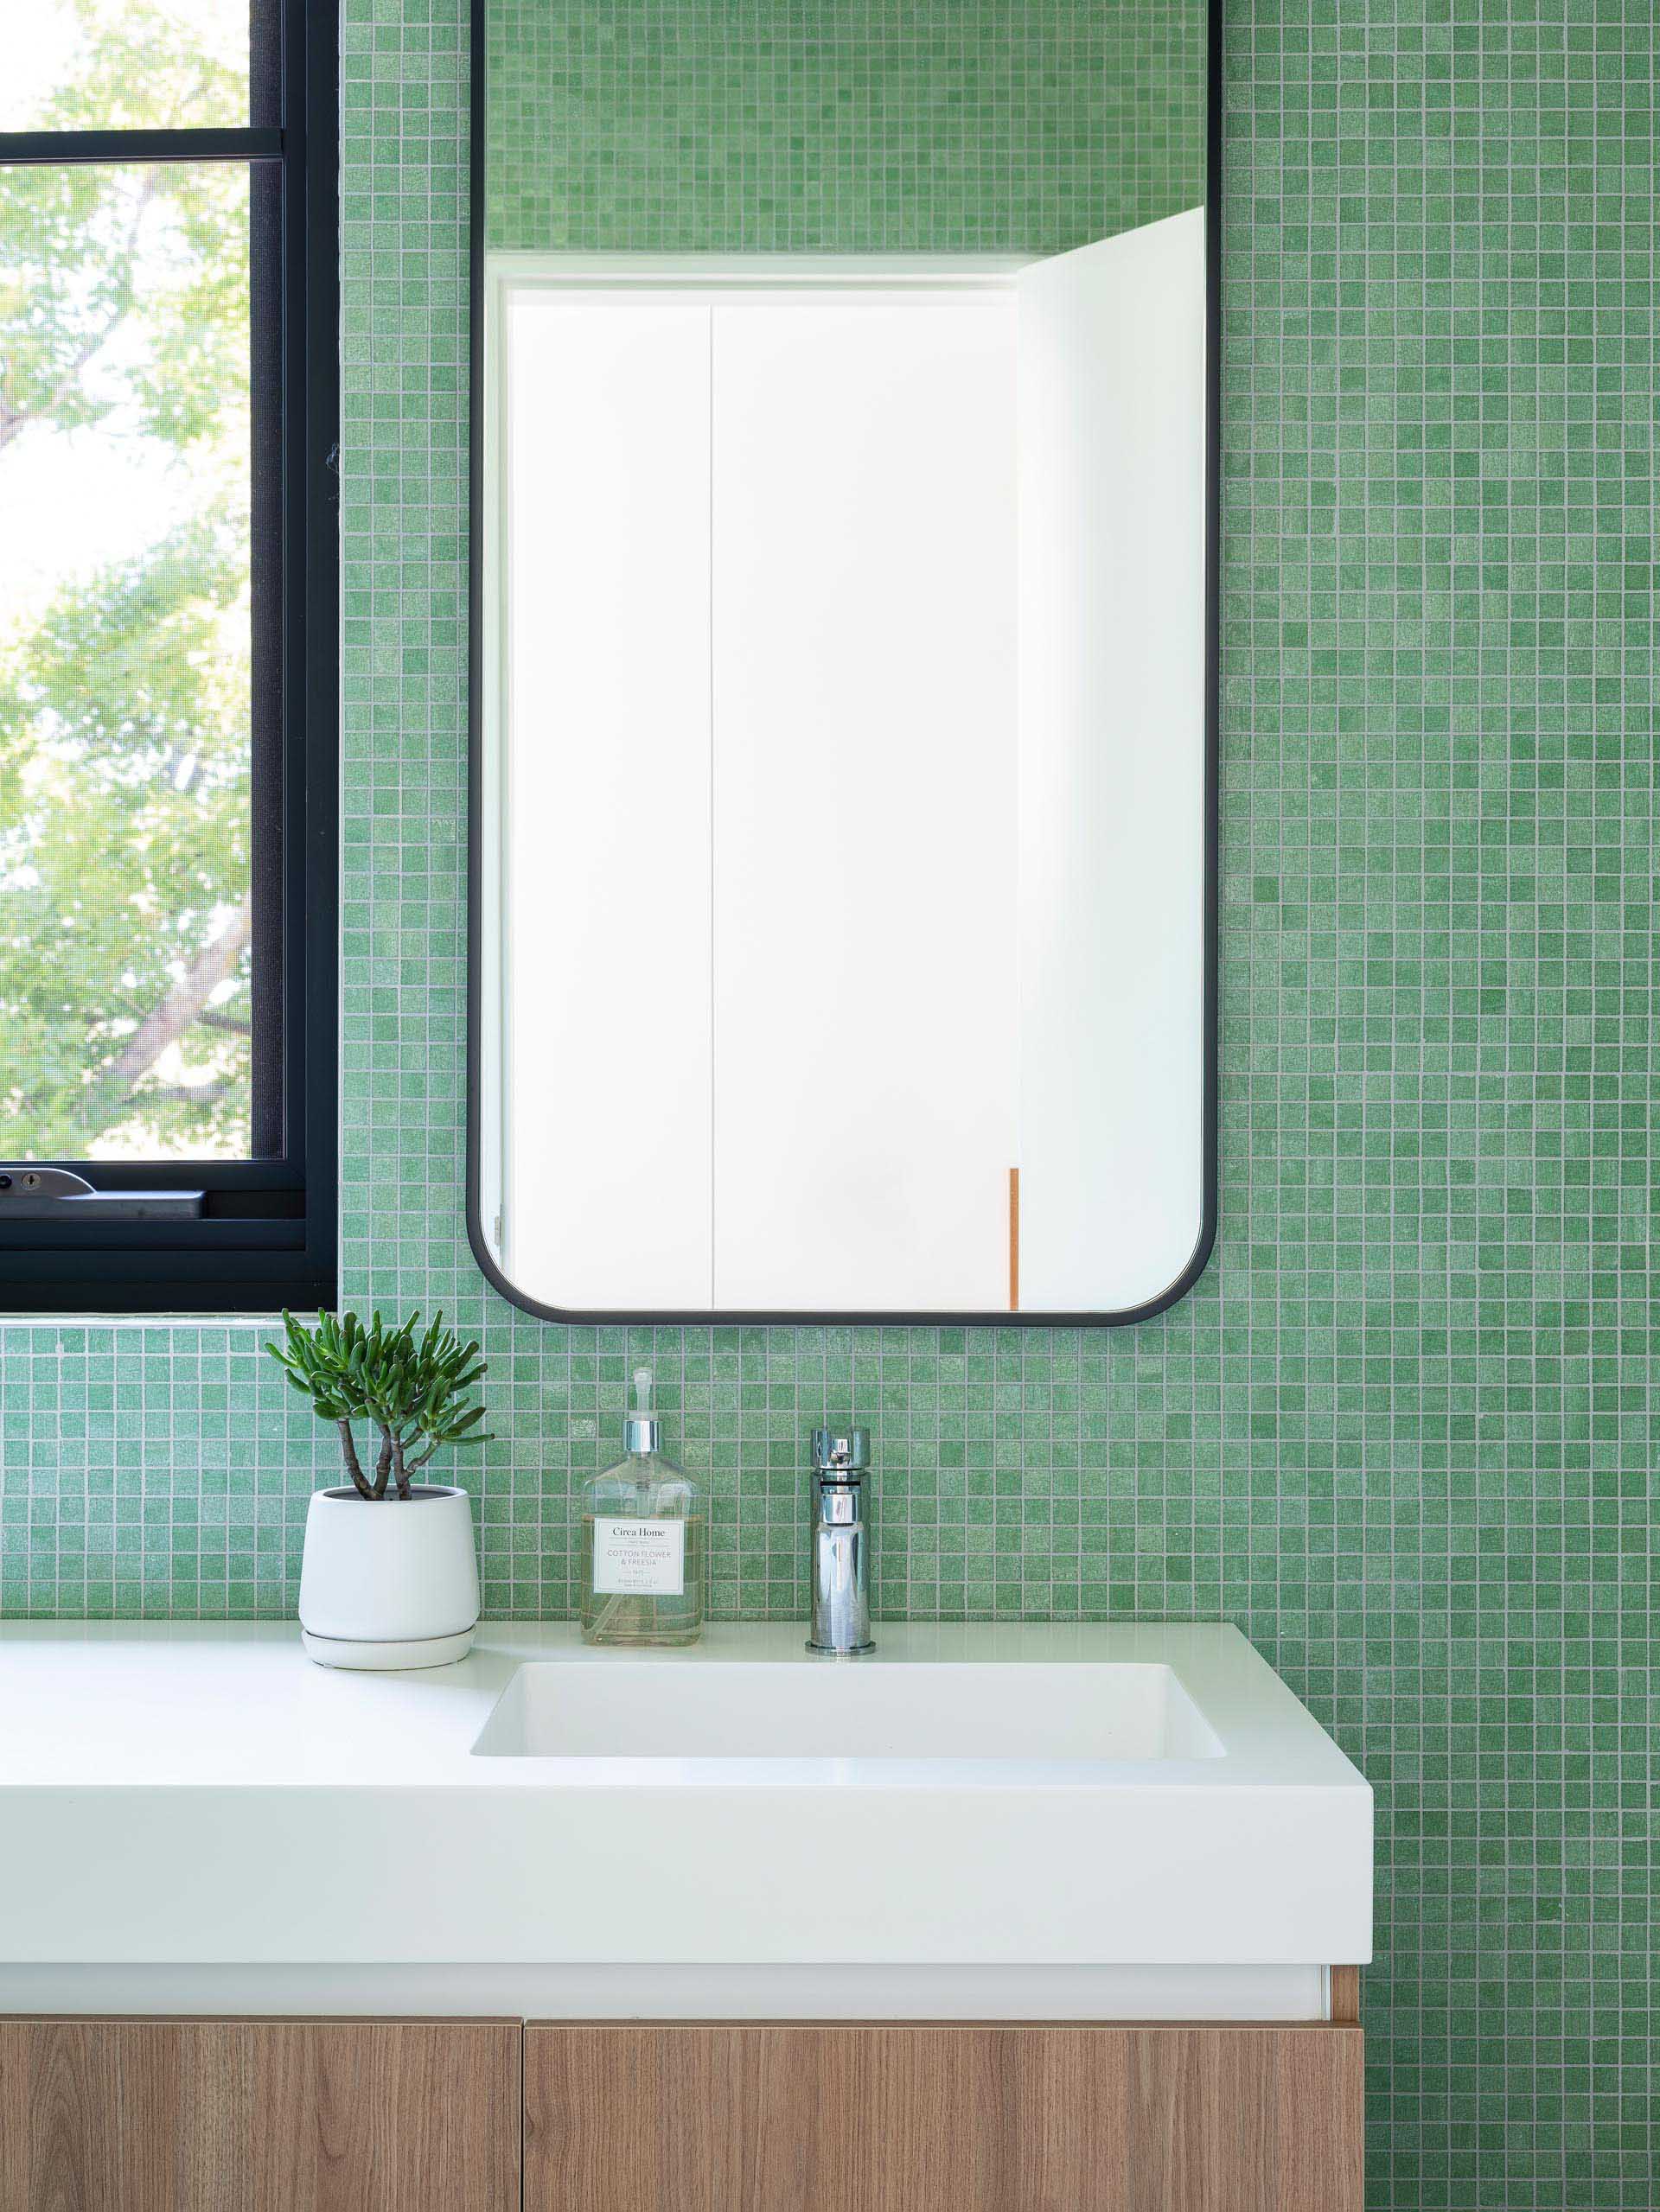 In this modern bathroom, small square green tiles cover the walls, while the black-framed mirror matches the window frame, and the white countertop with integrated sink rests atop a wood vanity.